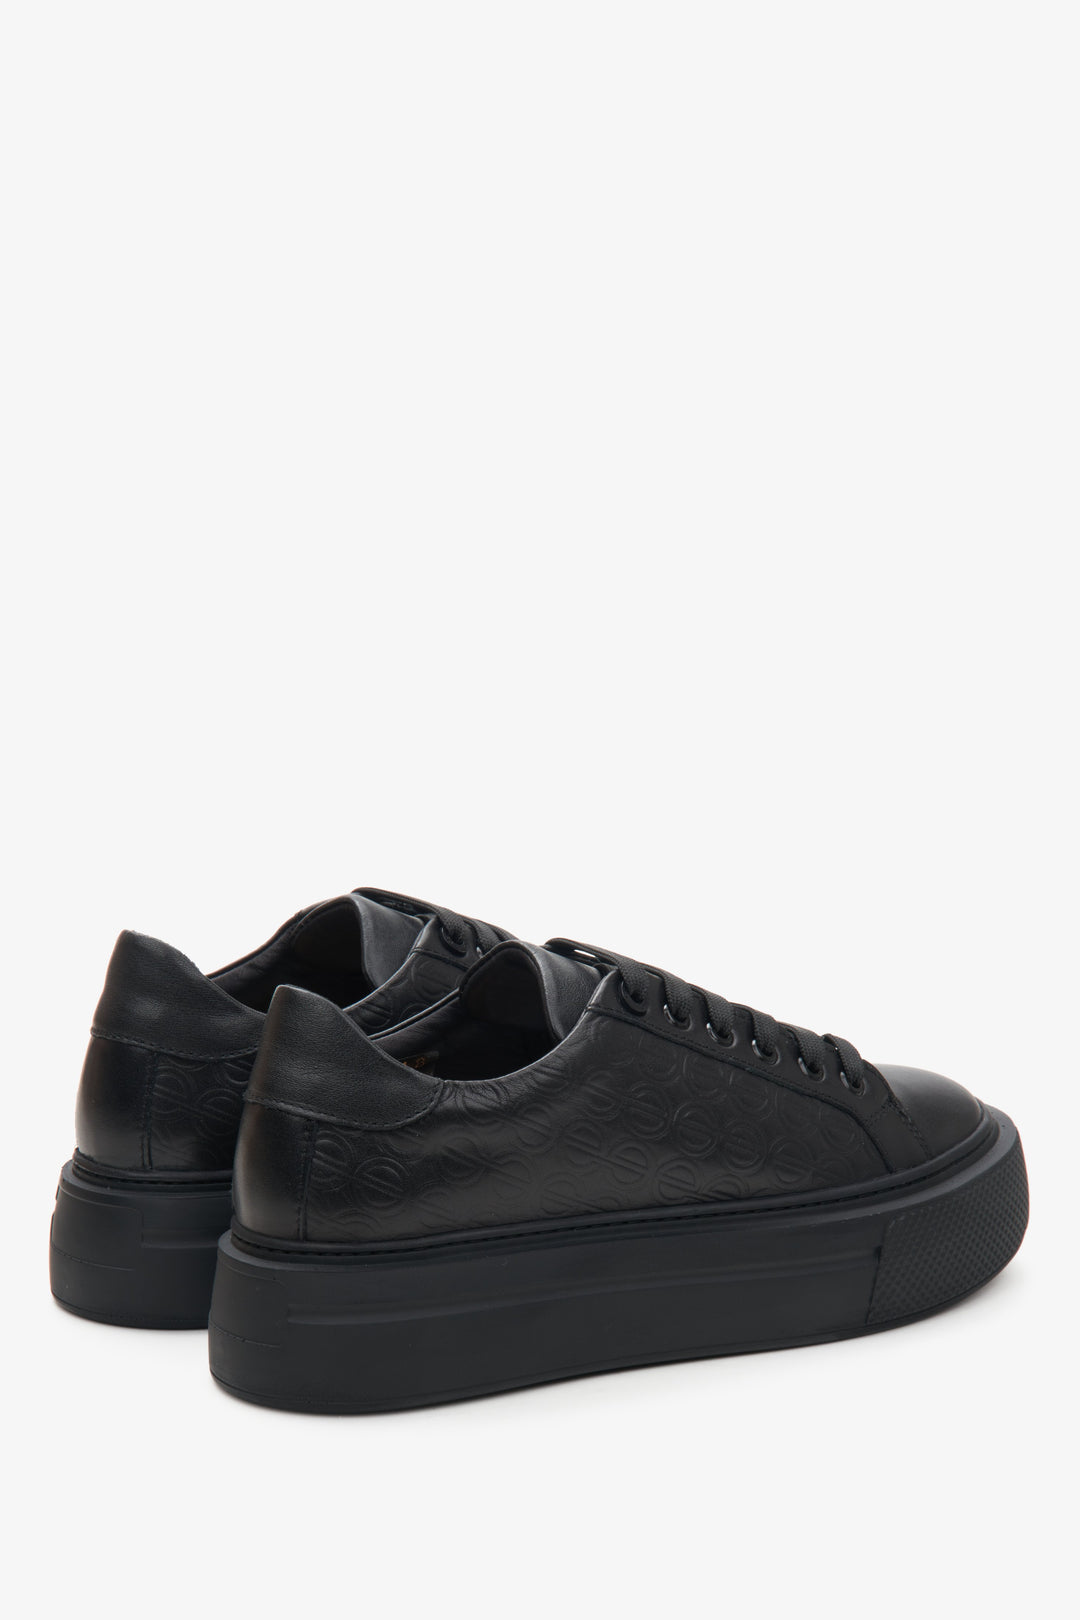 Women's black leather sneakers by Estro - close-up on the side line and heel counter.